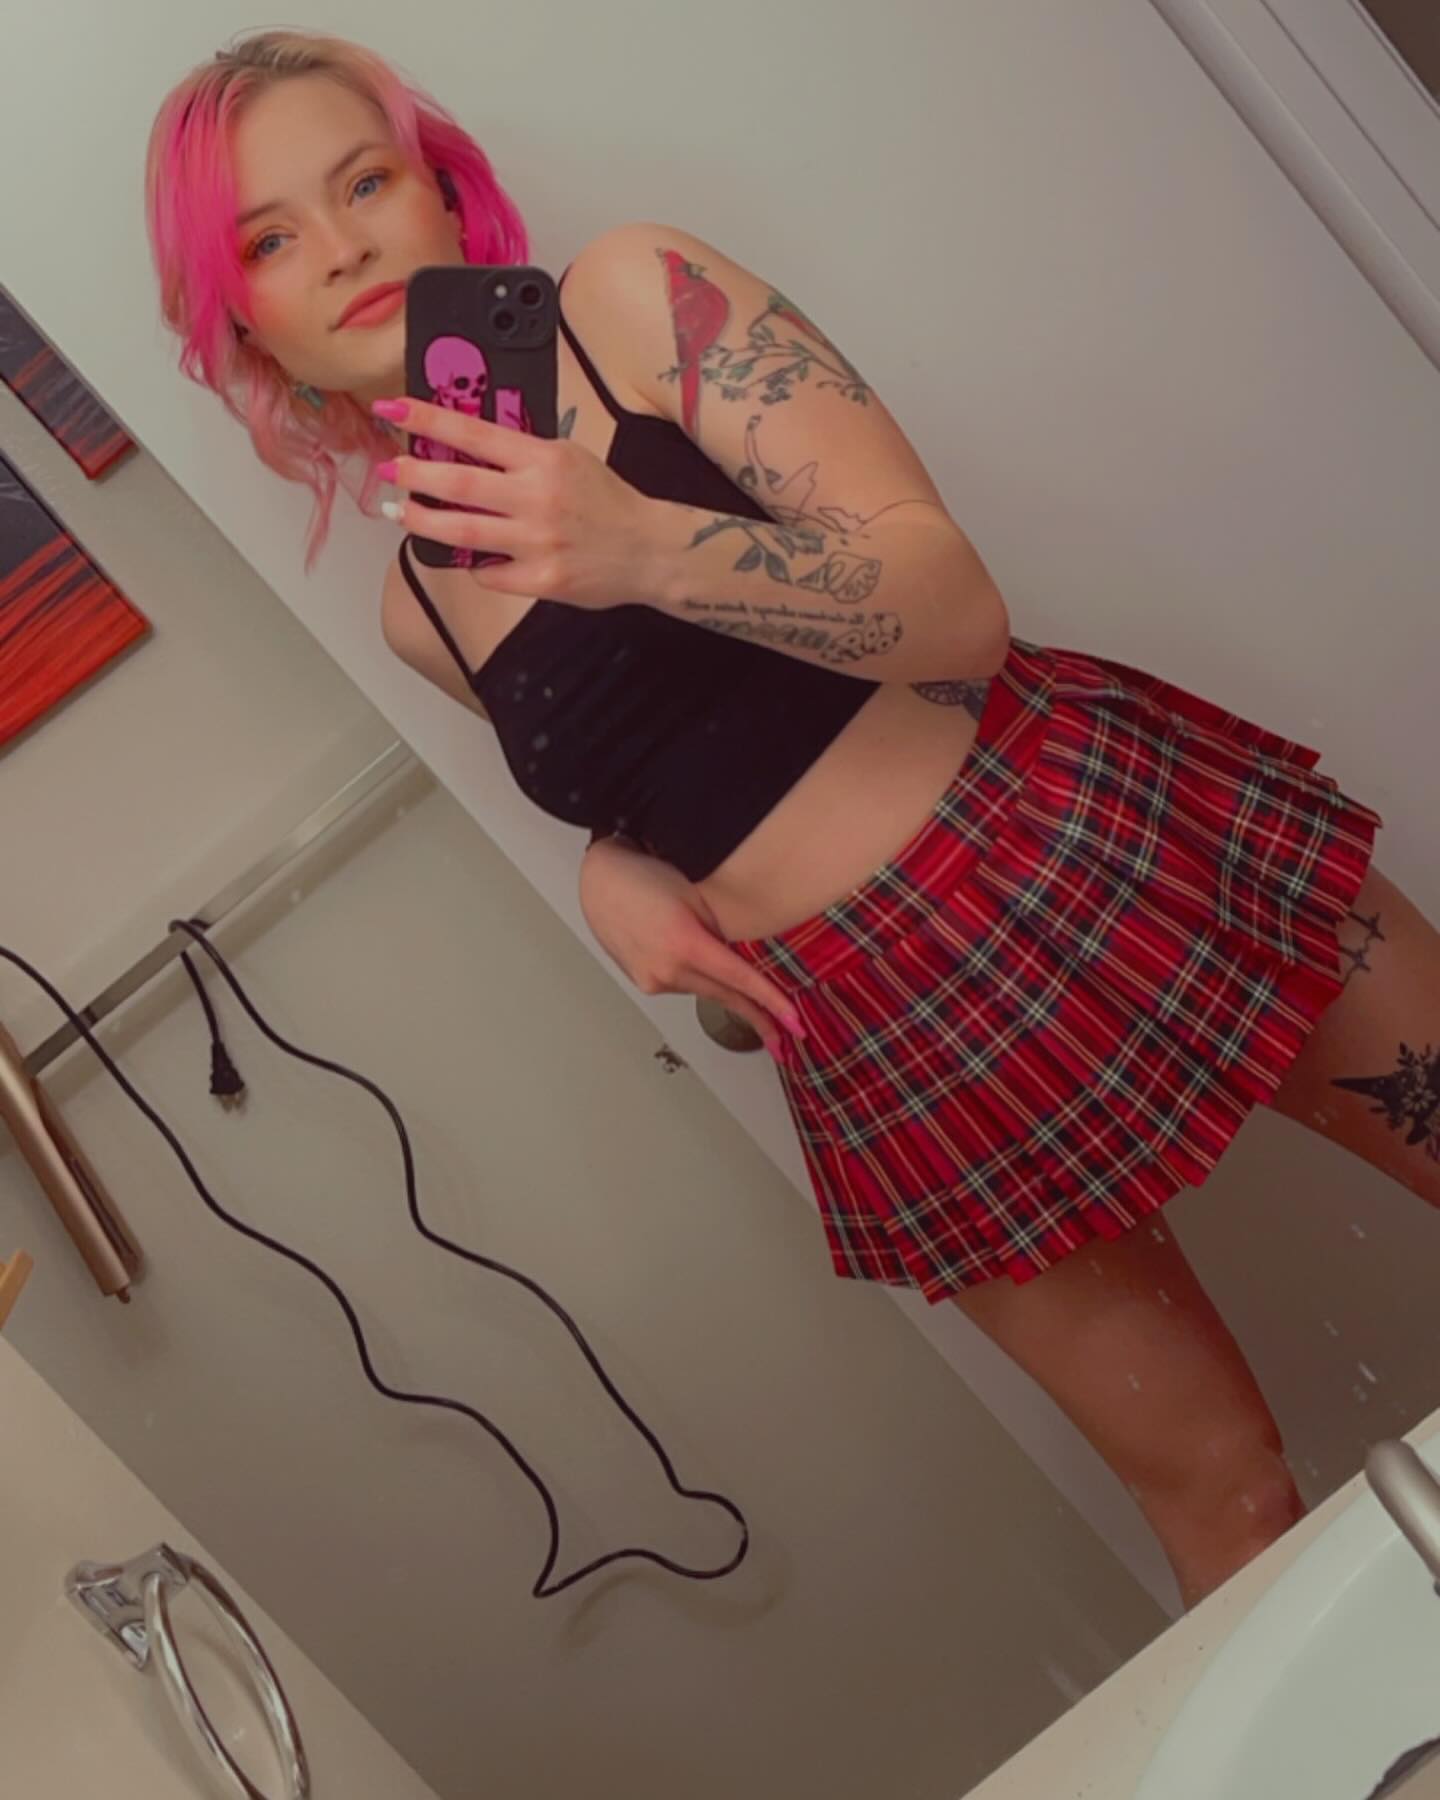 Is my skirt short enough? 🤪  #linkinbio #pinkhair #tatted #petite